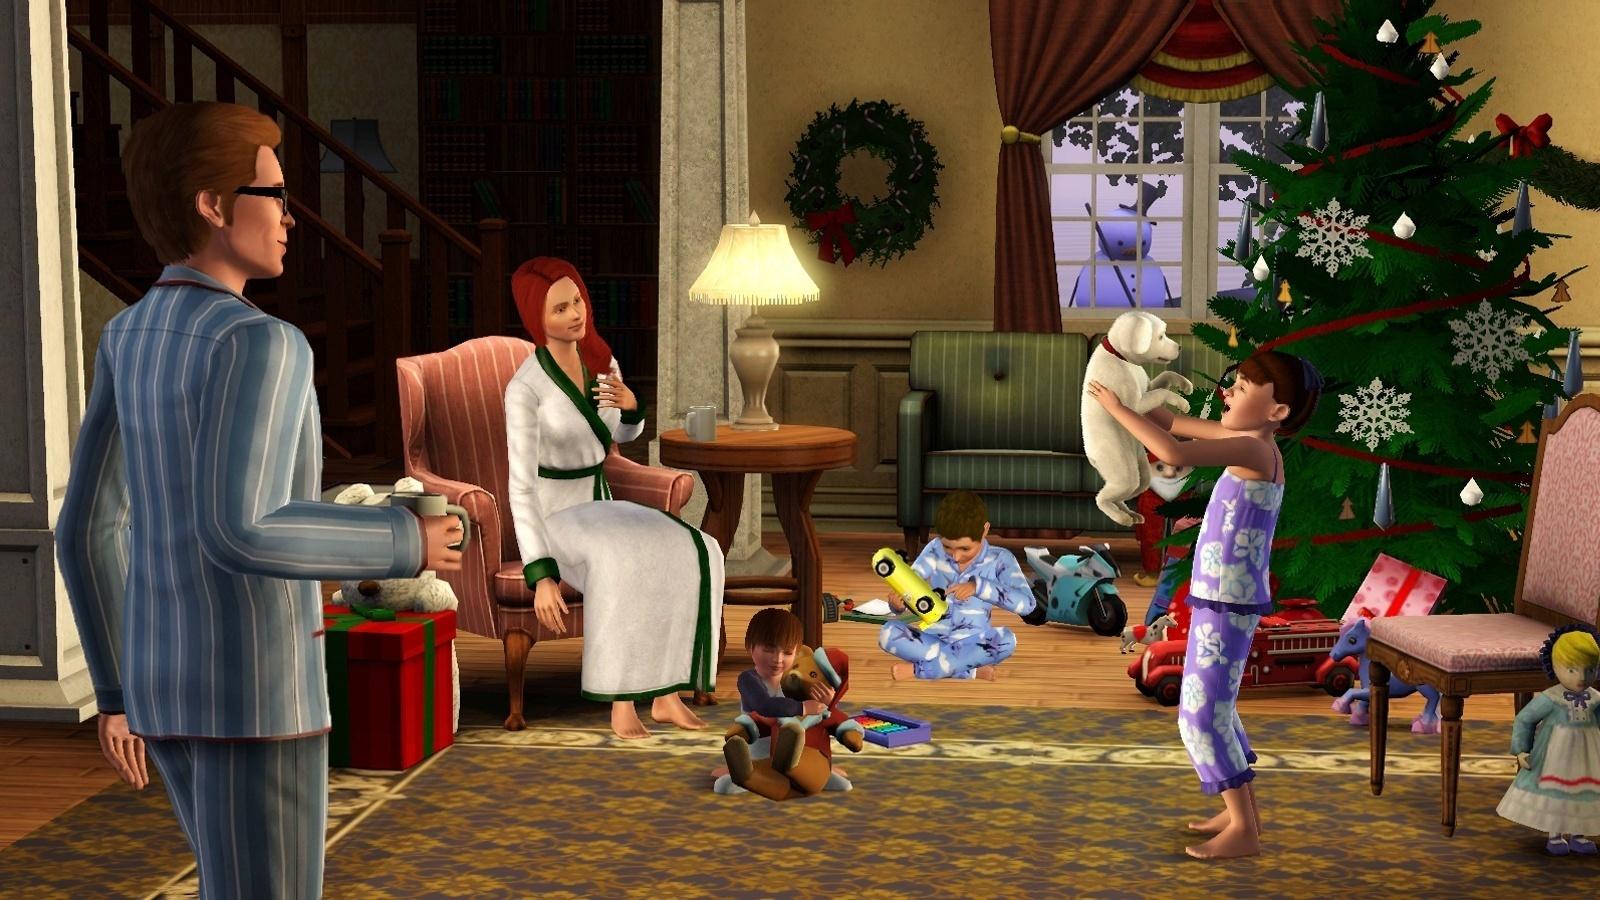 Family games 3. The SIMS 3. The SIMS 3 питомцы. SIMS 3 игра. Игра симс 3 питомцы.